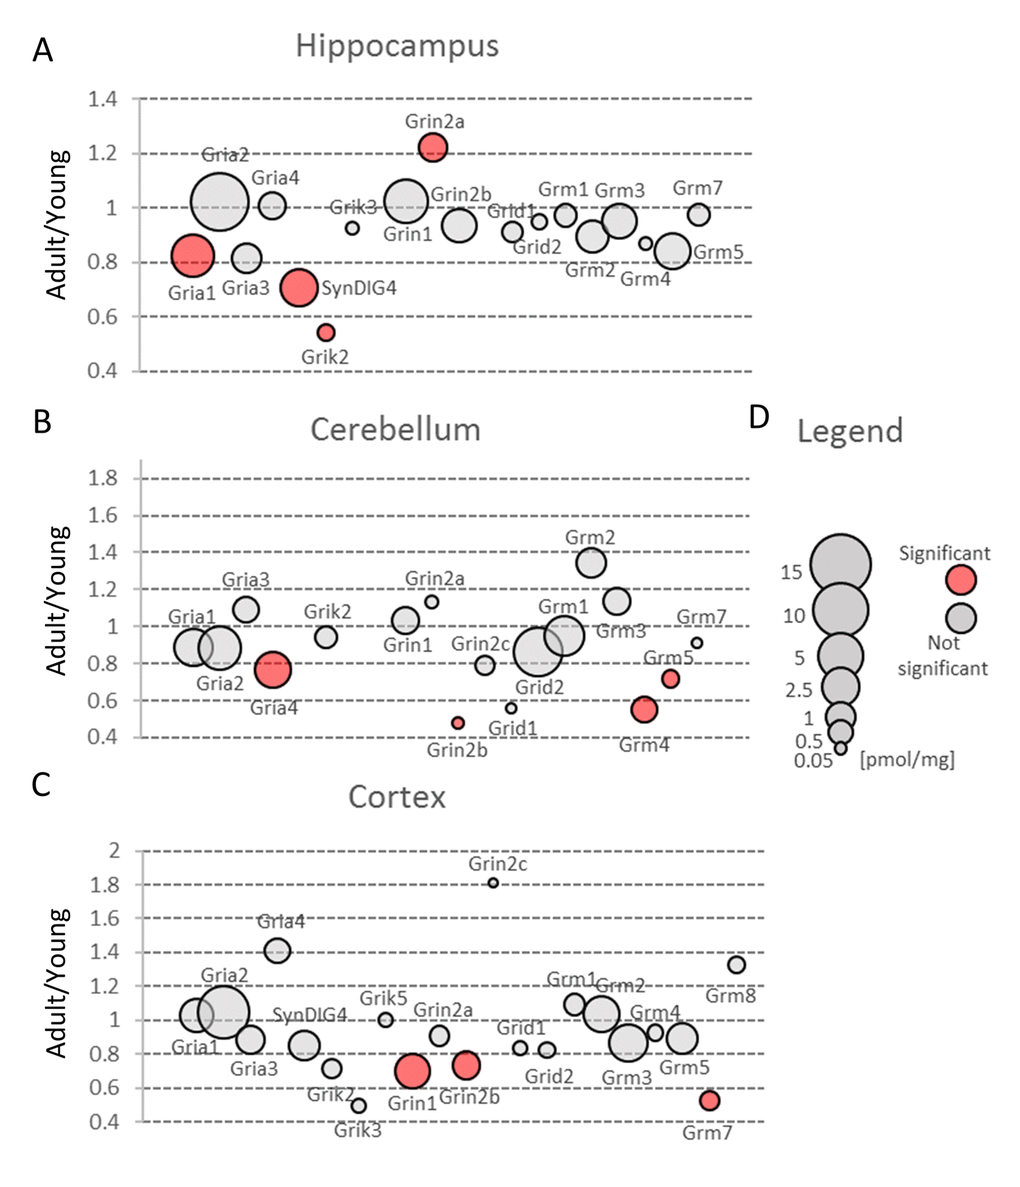 Changes in expression of proteins involved in glutamatergic transmission upon aging. Plots show ratios of protein concentrations in adult vs young brain structures: hippocampus (A), cerebellum (B) and cortex (C). The size of bubbles is proportional to the average protein concentration in respective young animals brain structures. Statistically significant differences are shown as the red filled circles.